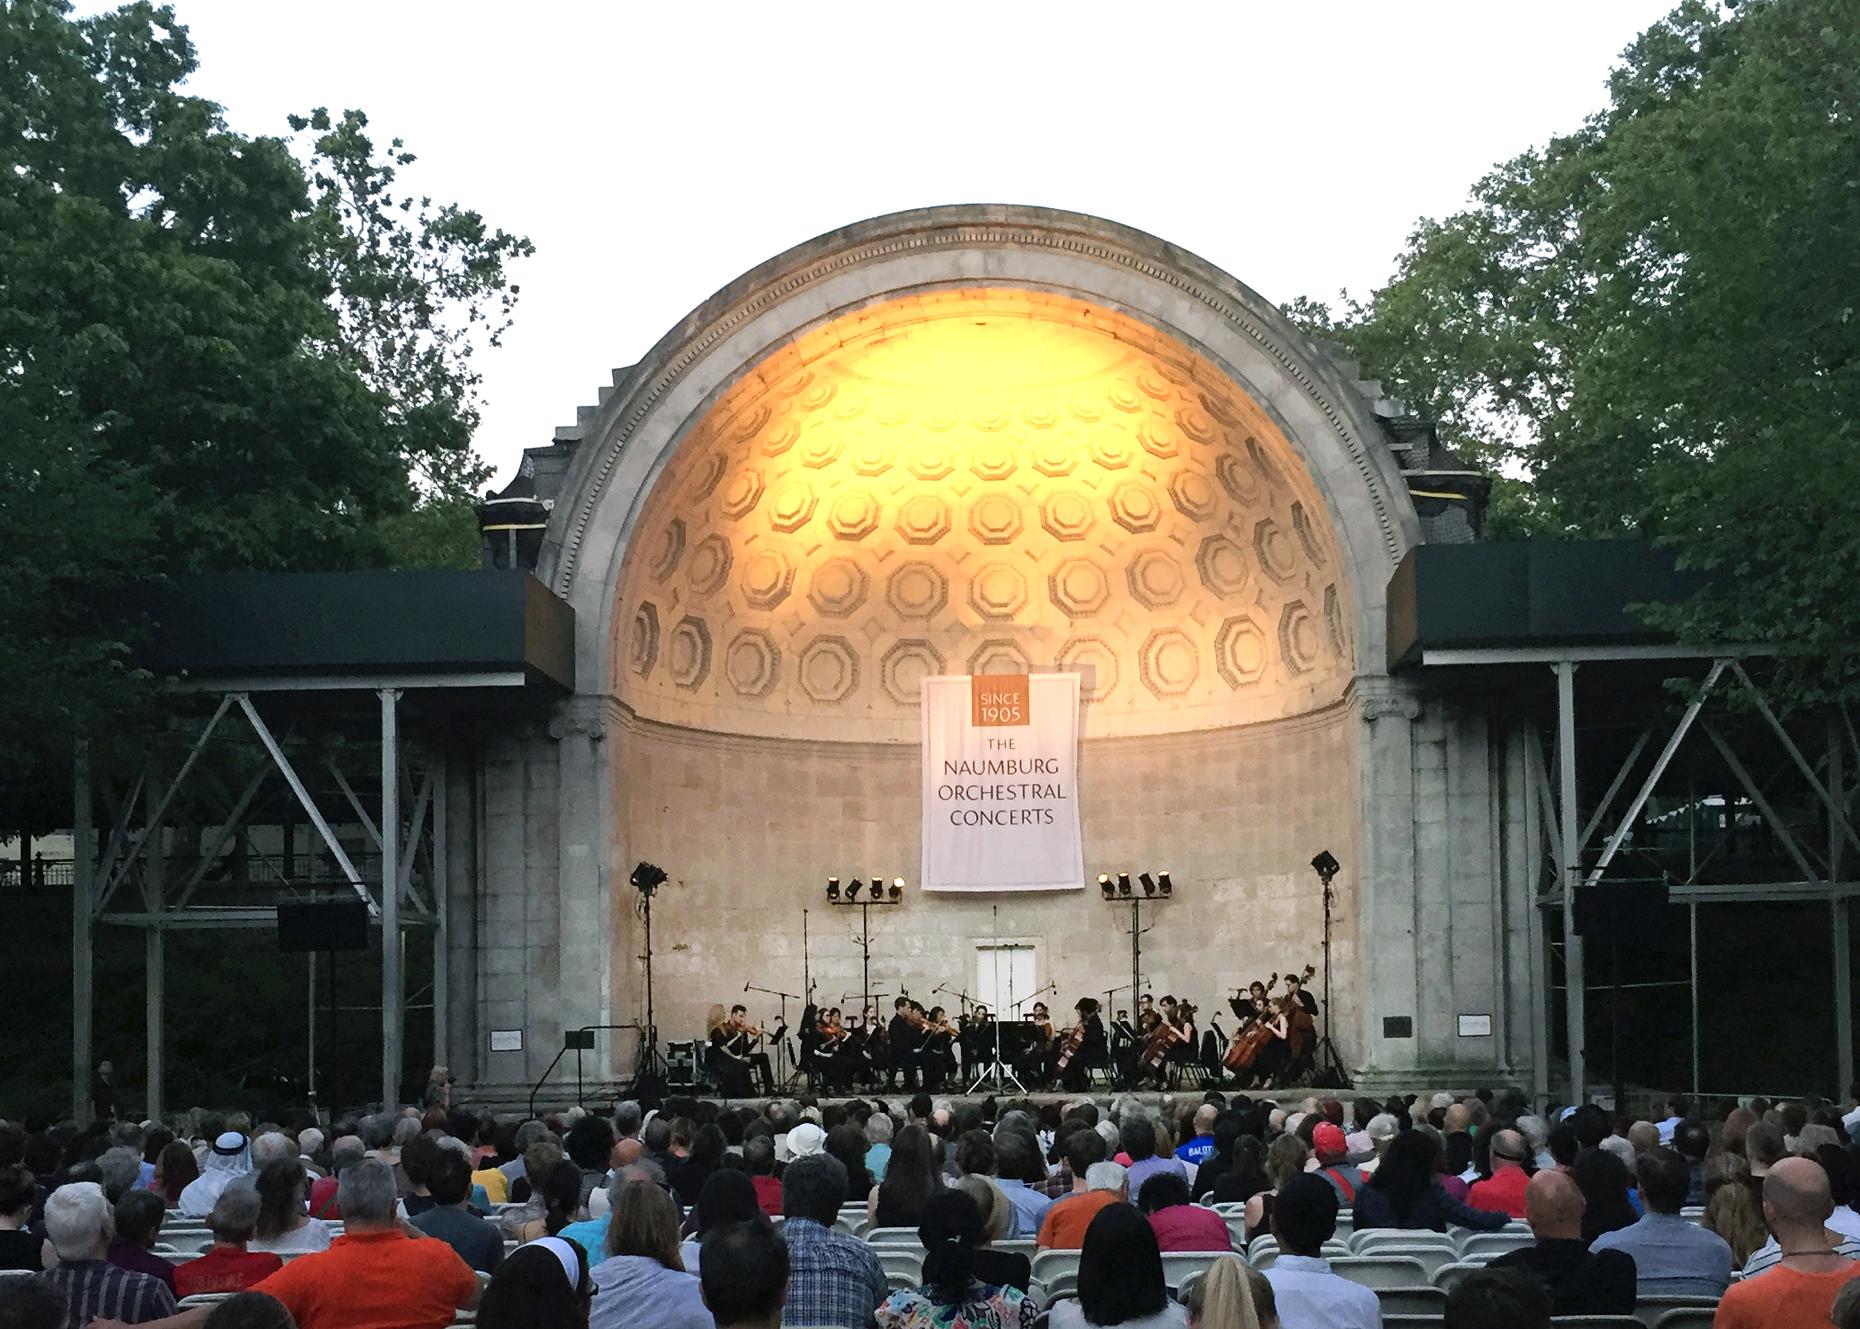 Live Broadcasts from the Naumburg Bandshell Live Broadcasts WQXR